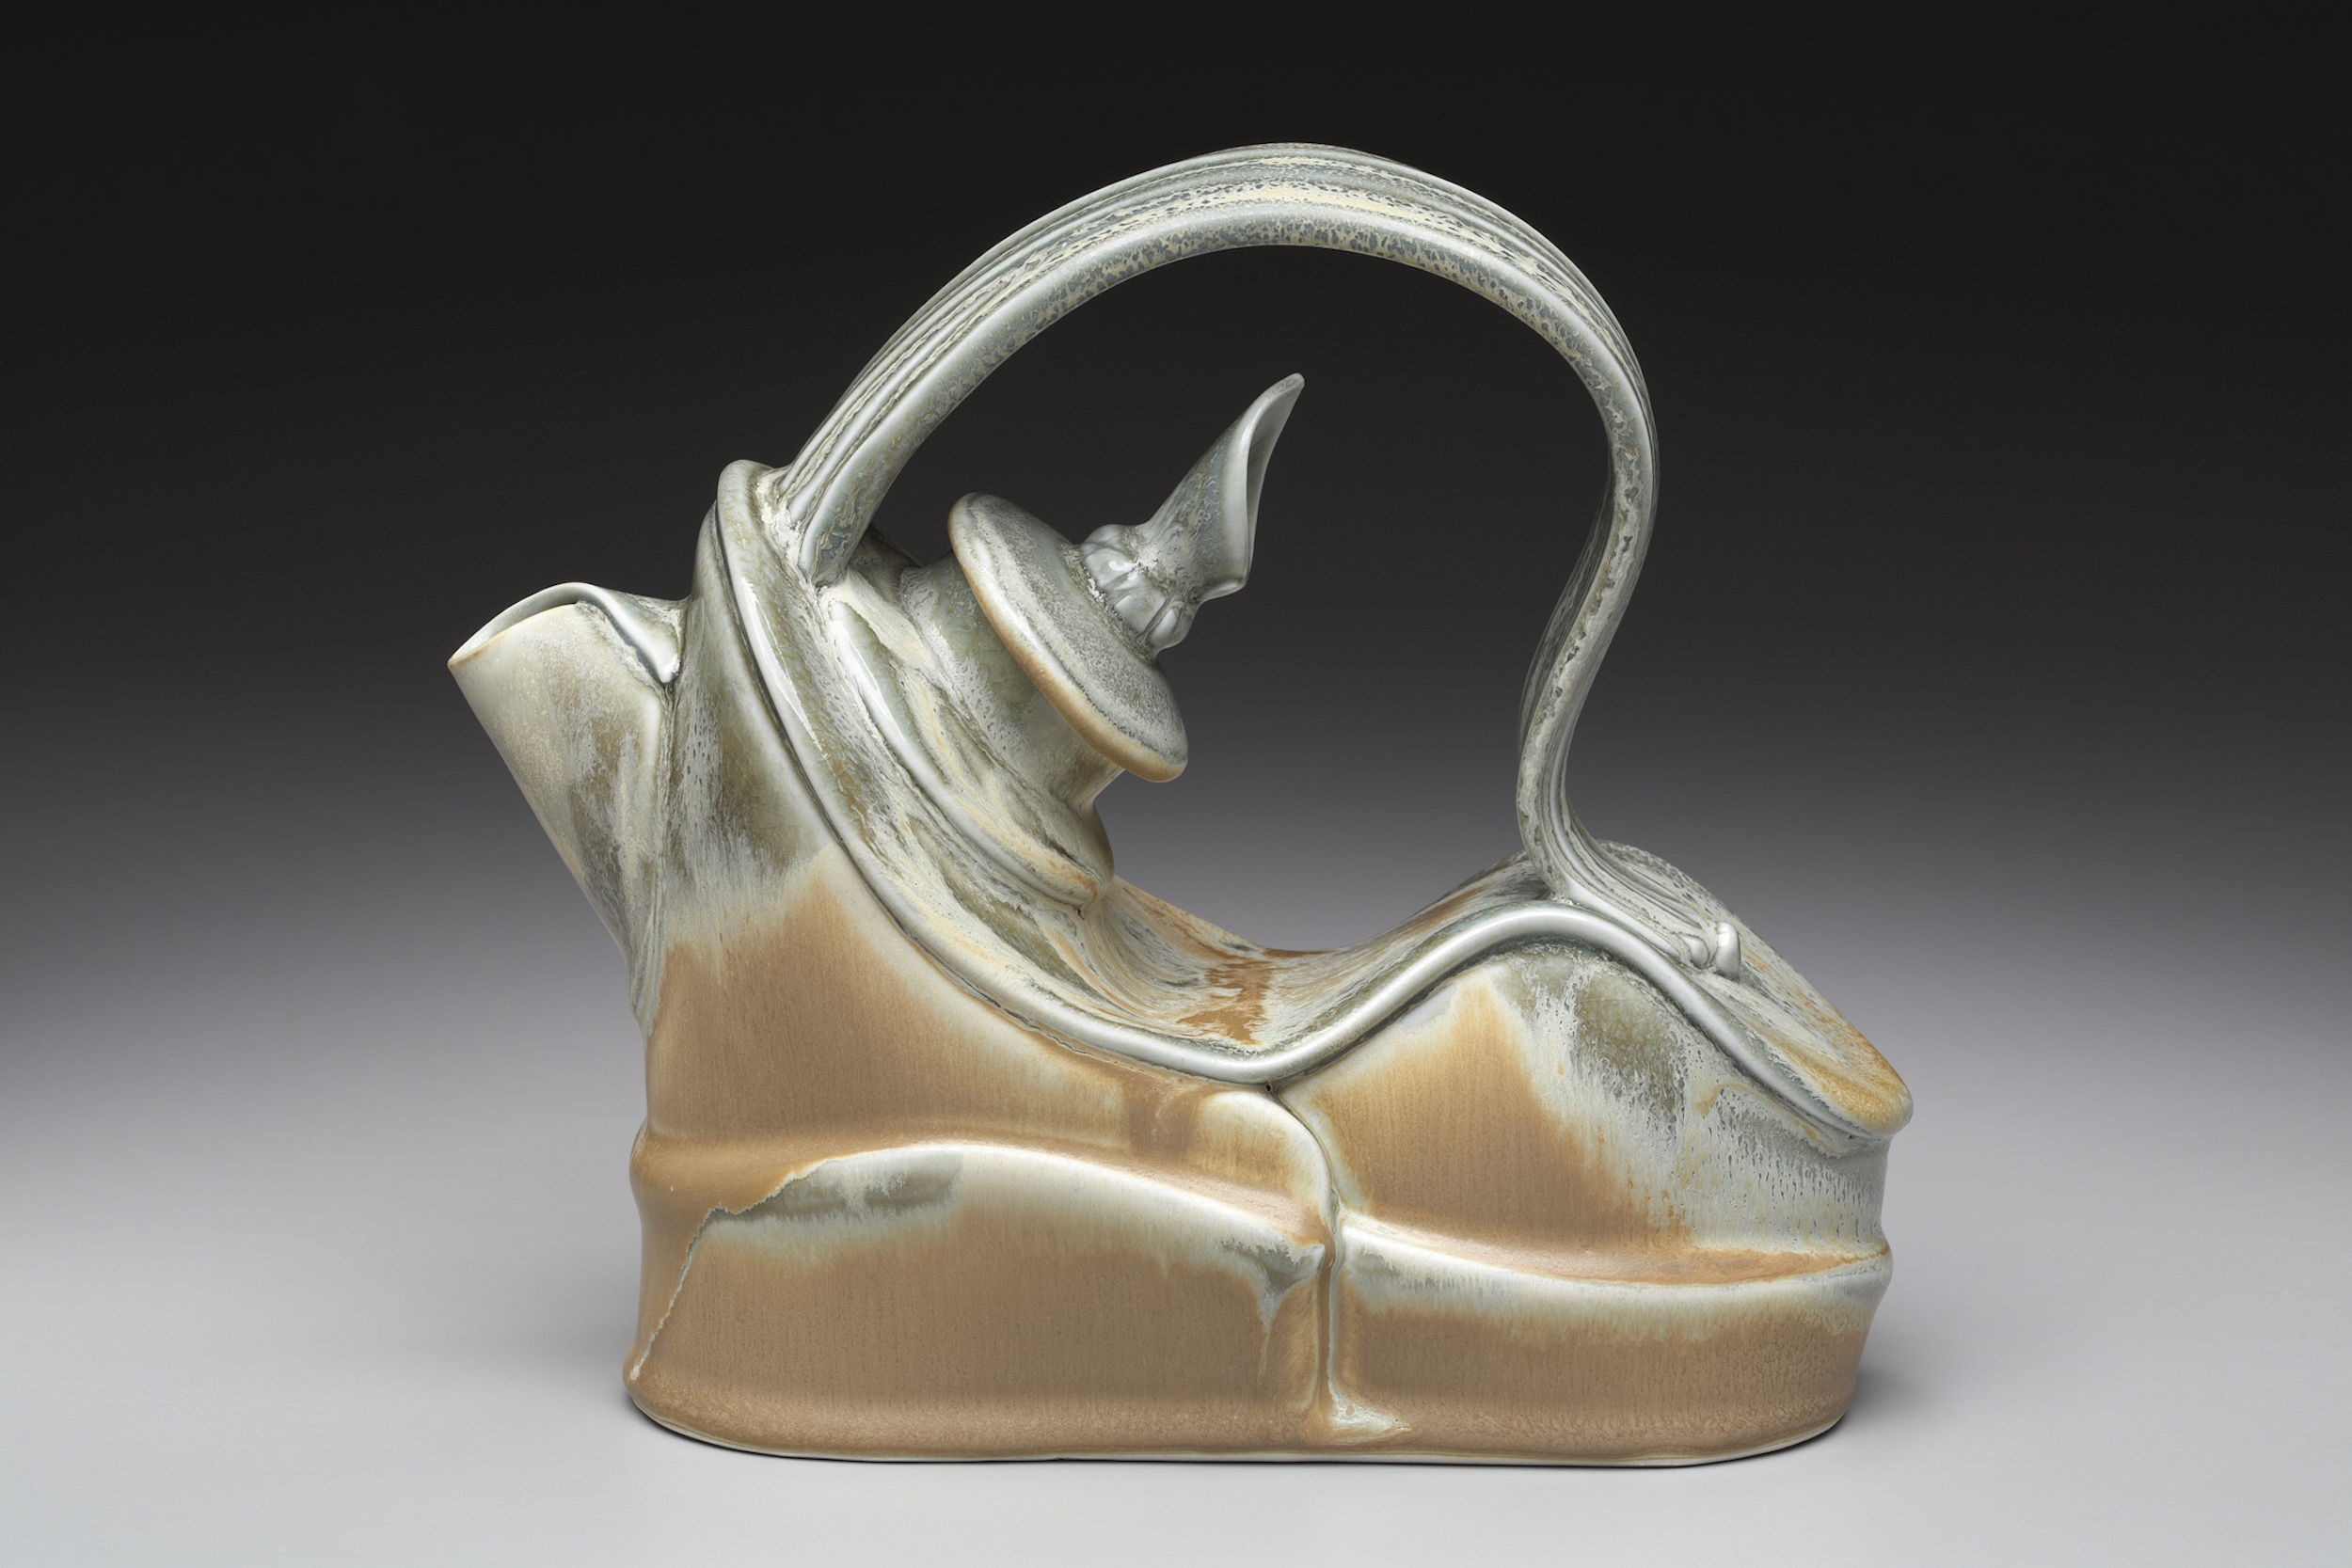 Marion Angelica, Flat Iron Teapot, 8 in. (20 cm) in length, Grolleg porcelain, fired to cone 10 in reduction